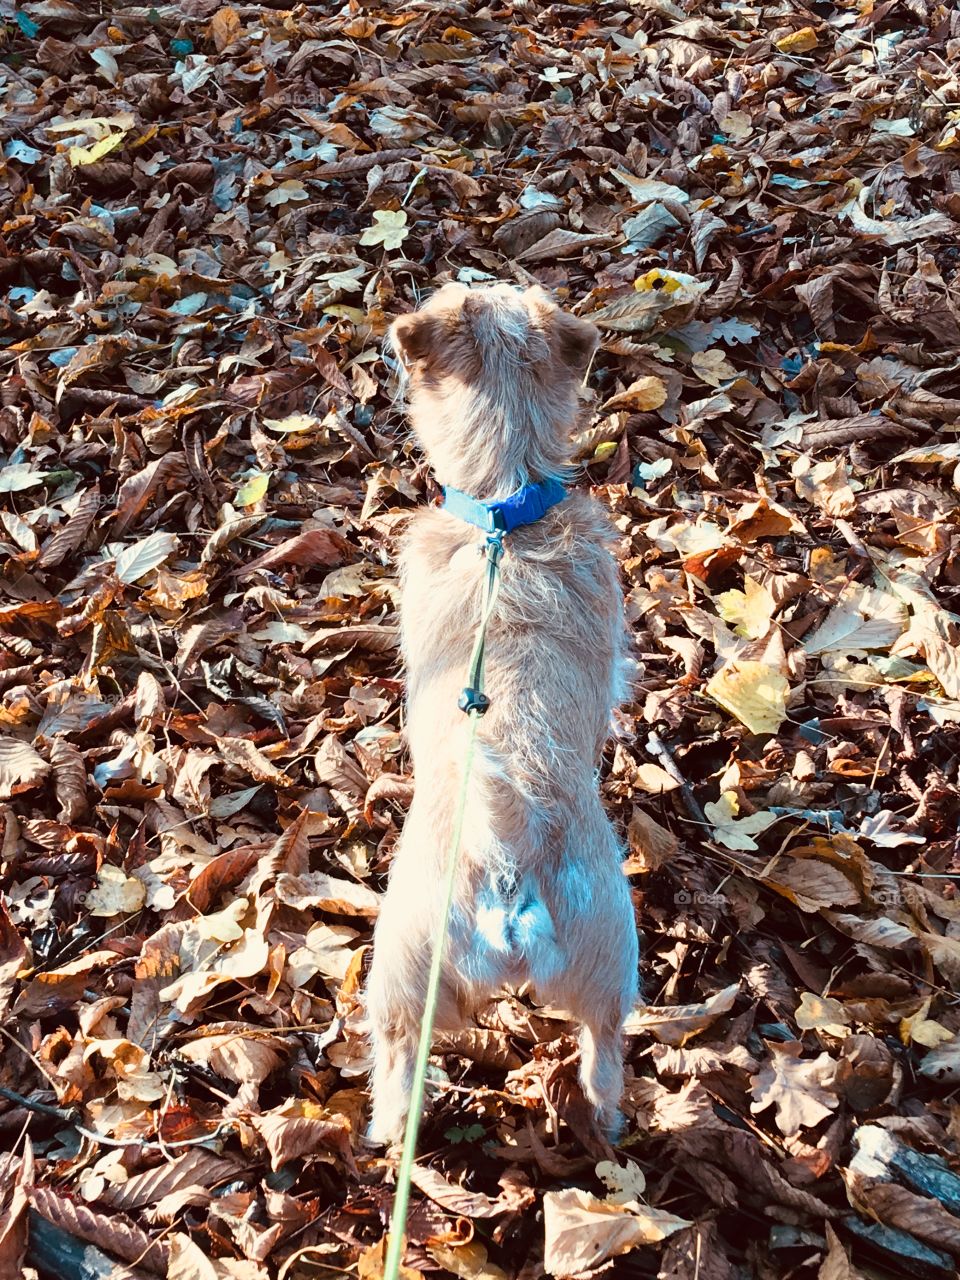 Dog and leaves